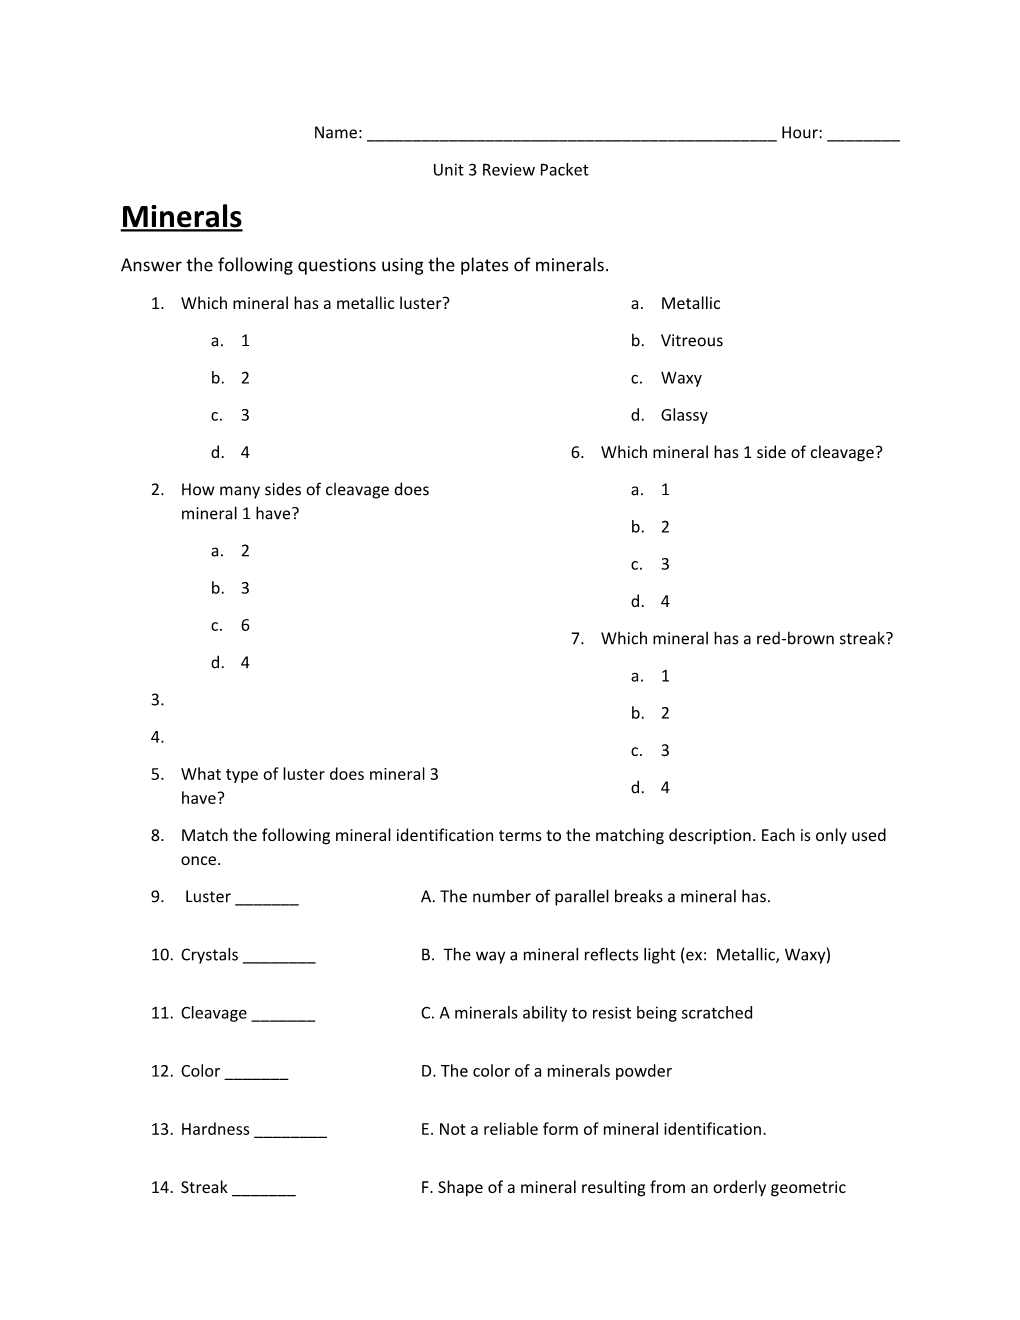 Answer the Following Questions Using the Plates of Minerals